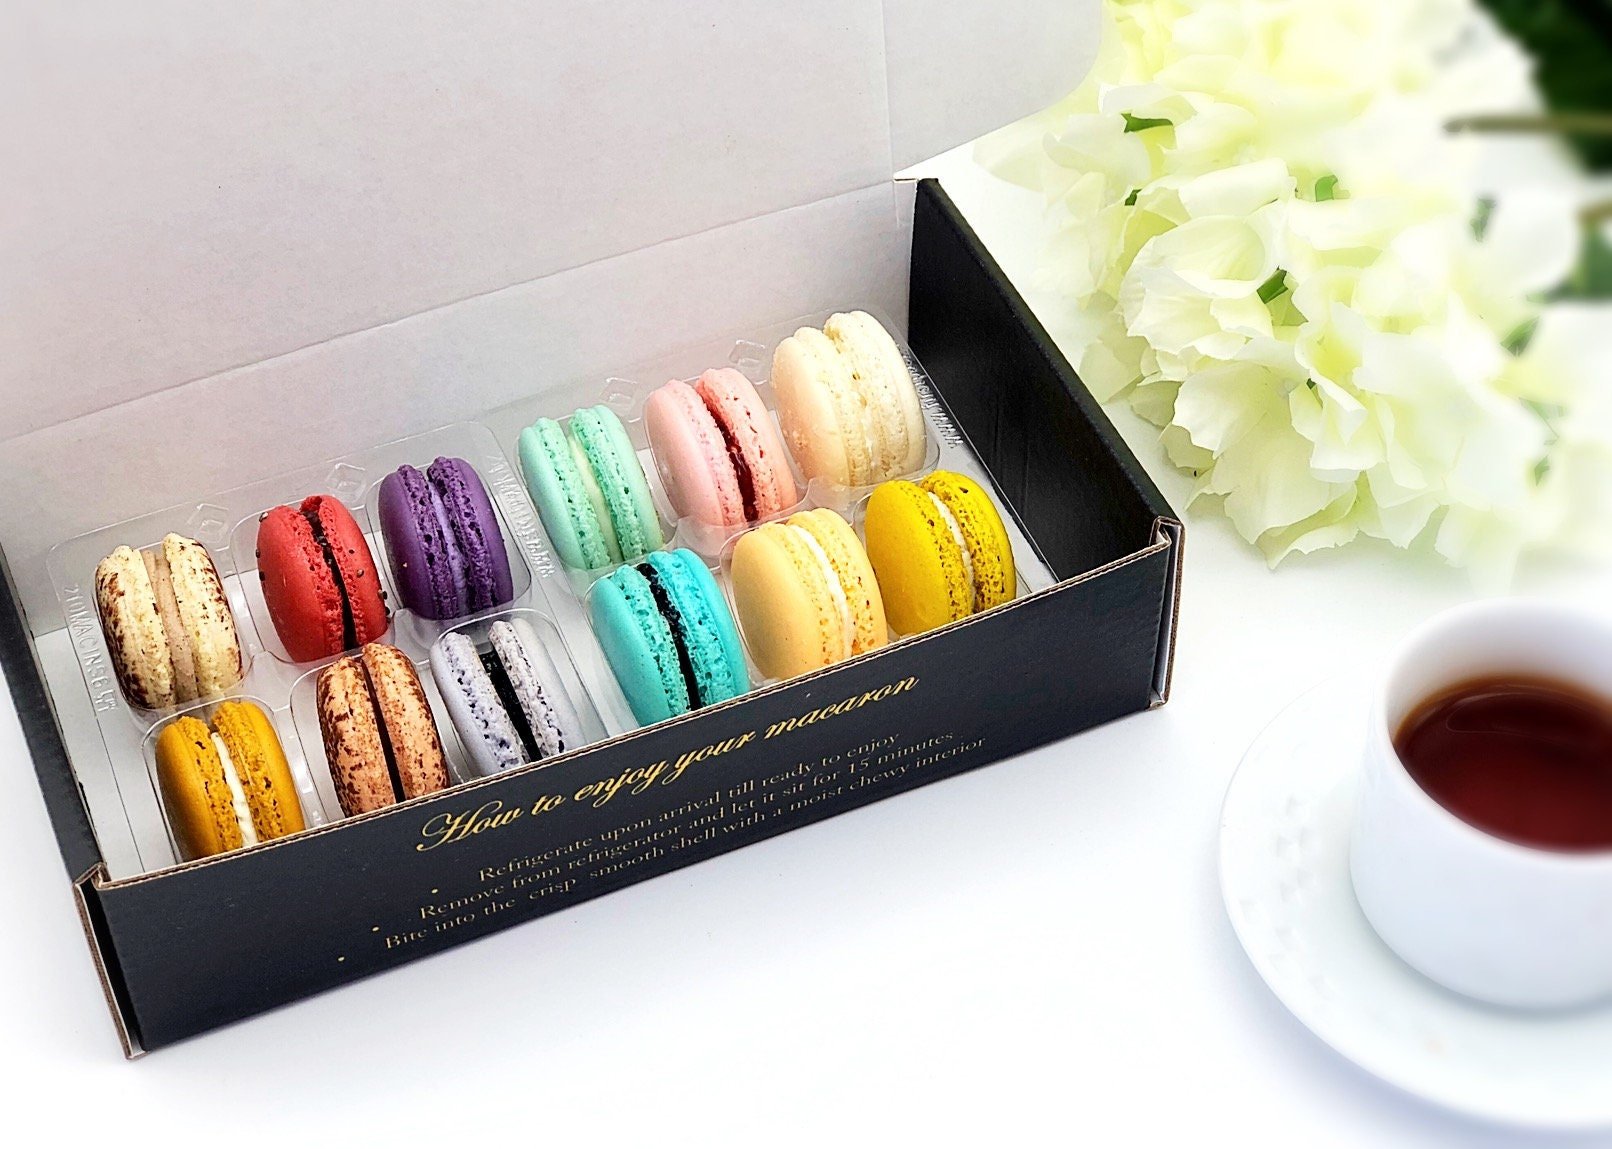 Choose your own macaron| Free Shipping | Perfect for gift giving all holiday season long. - Macaron Centrale12 pack